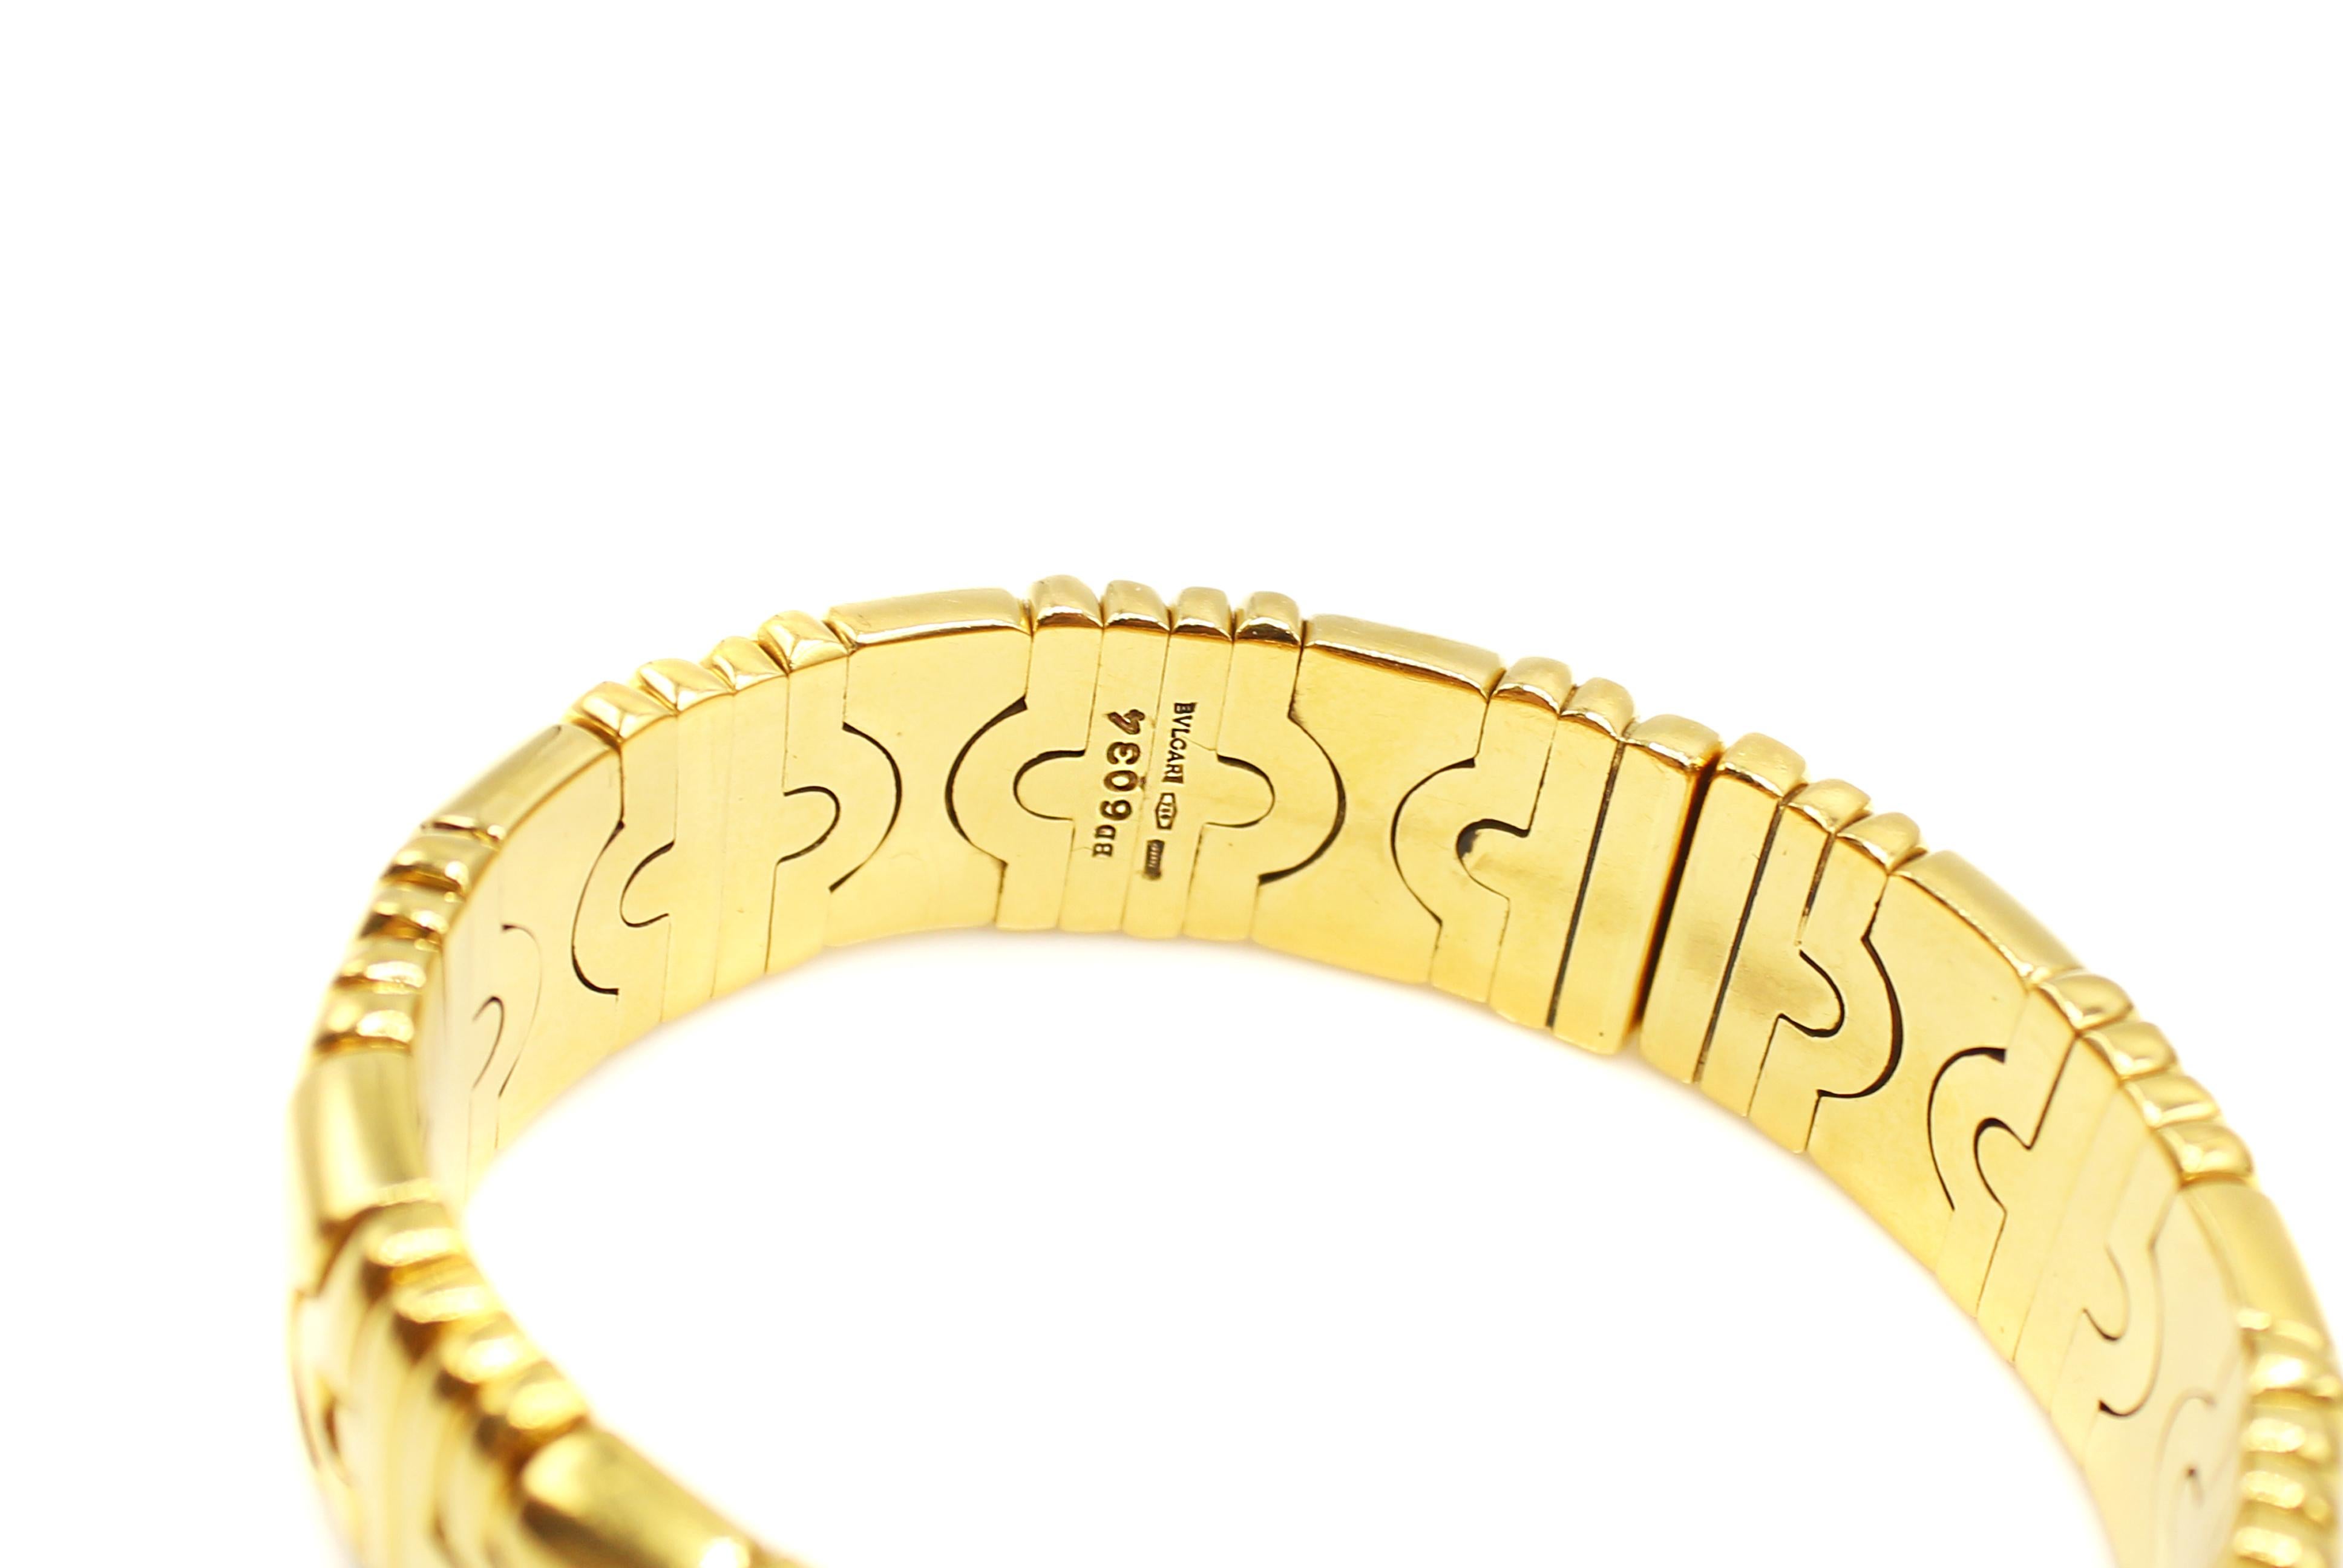 This classic Bulgari Parentesi 18K Yellow Gold is timeless, with a flexible opening for easy wear. This amazingly well hand-crafted bangle by the famous Italian jeweler was designed with an architectural geometric look which gives this piece of chic